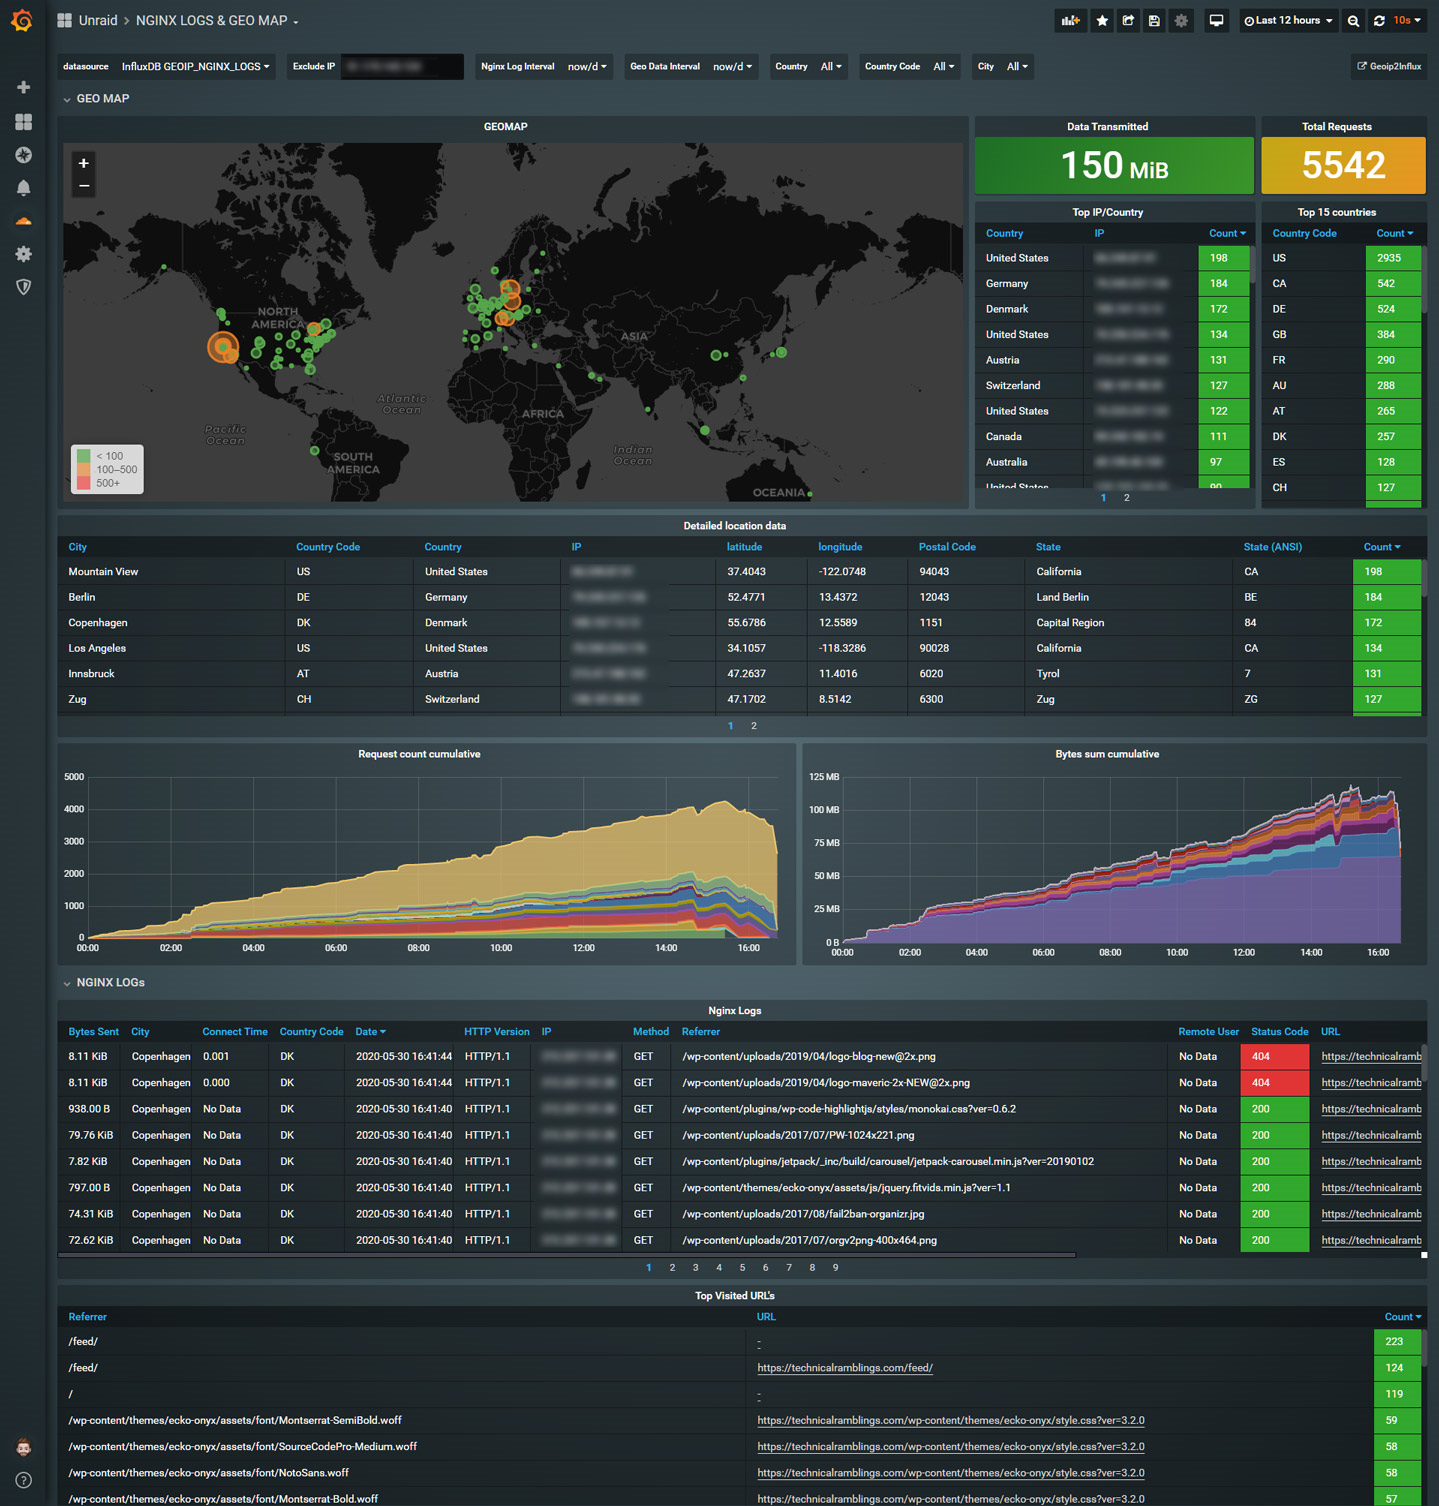 Grafana image showing map of Nginx log entries and other statistical data